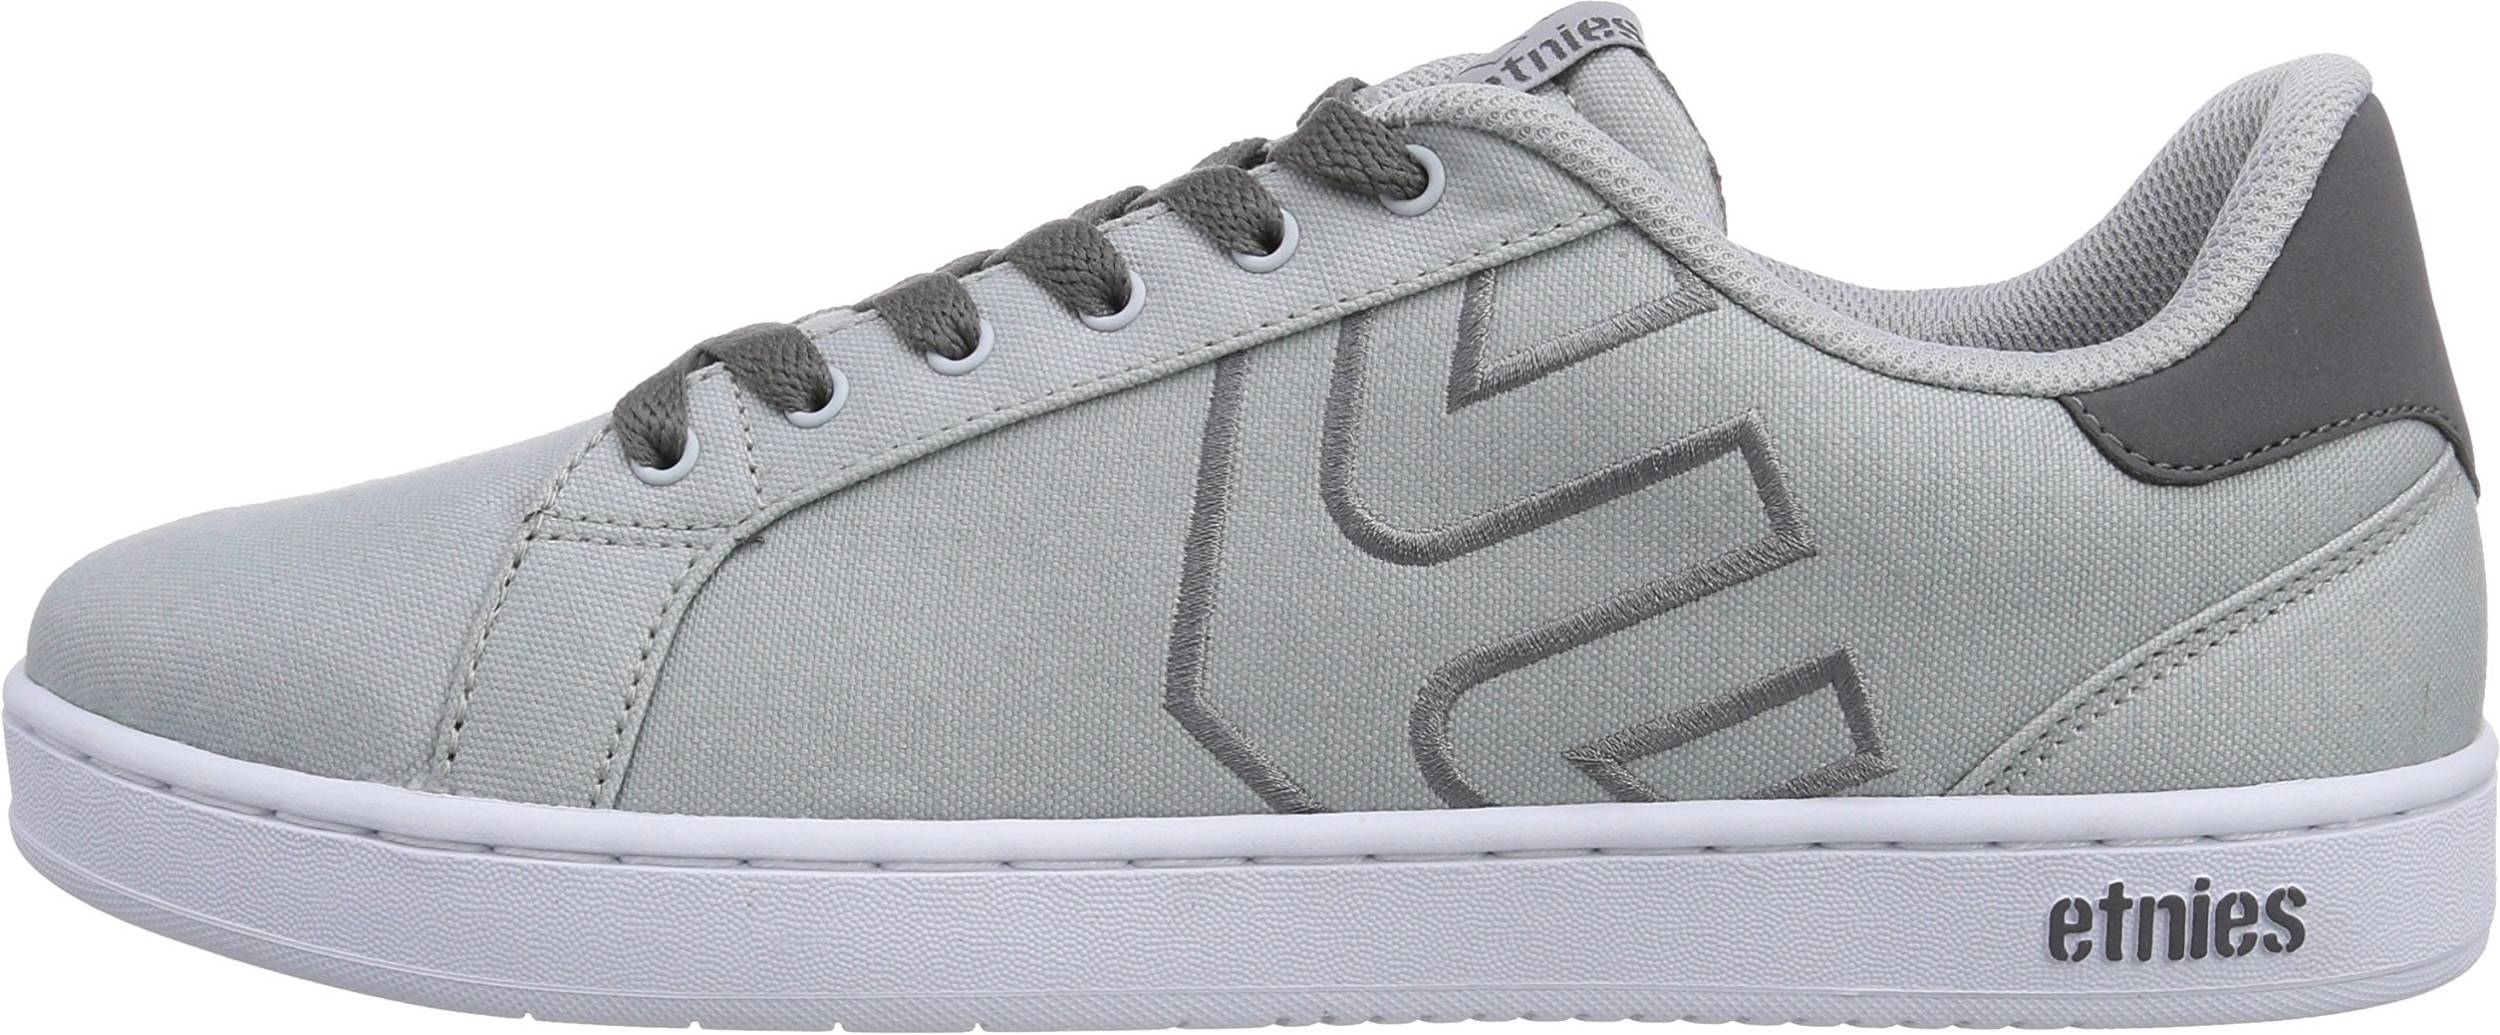 Only $42 + Review of Etnies Fader LS 